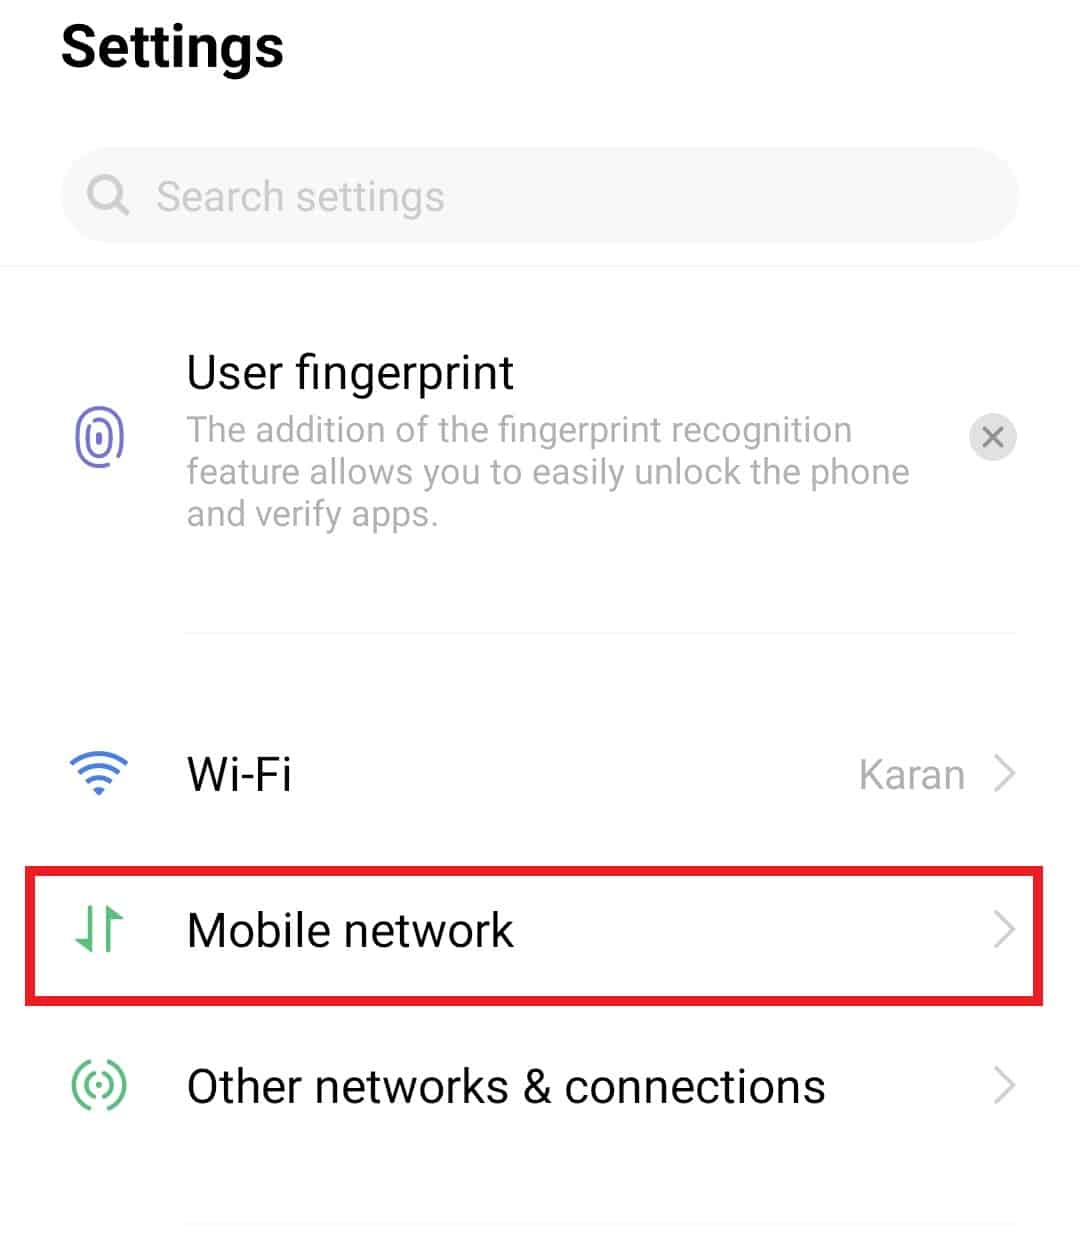 Tap on Mobile network